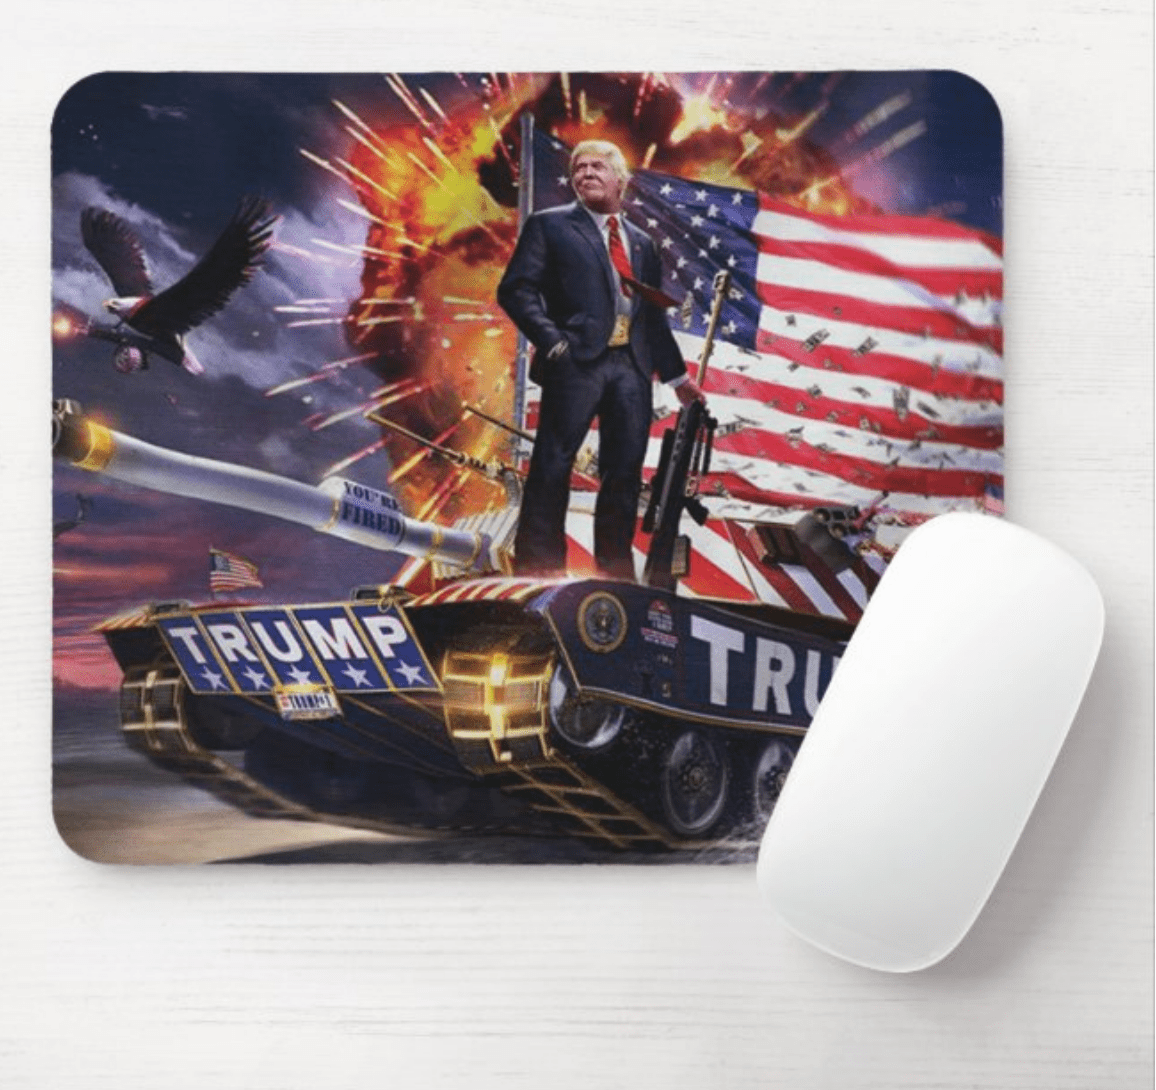 50% Off Mouse Pads This Week